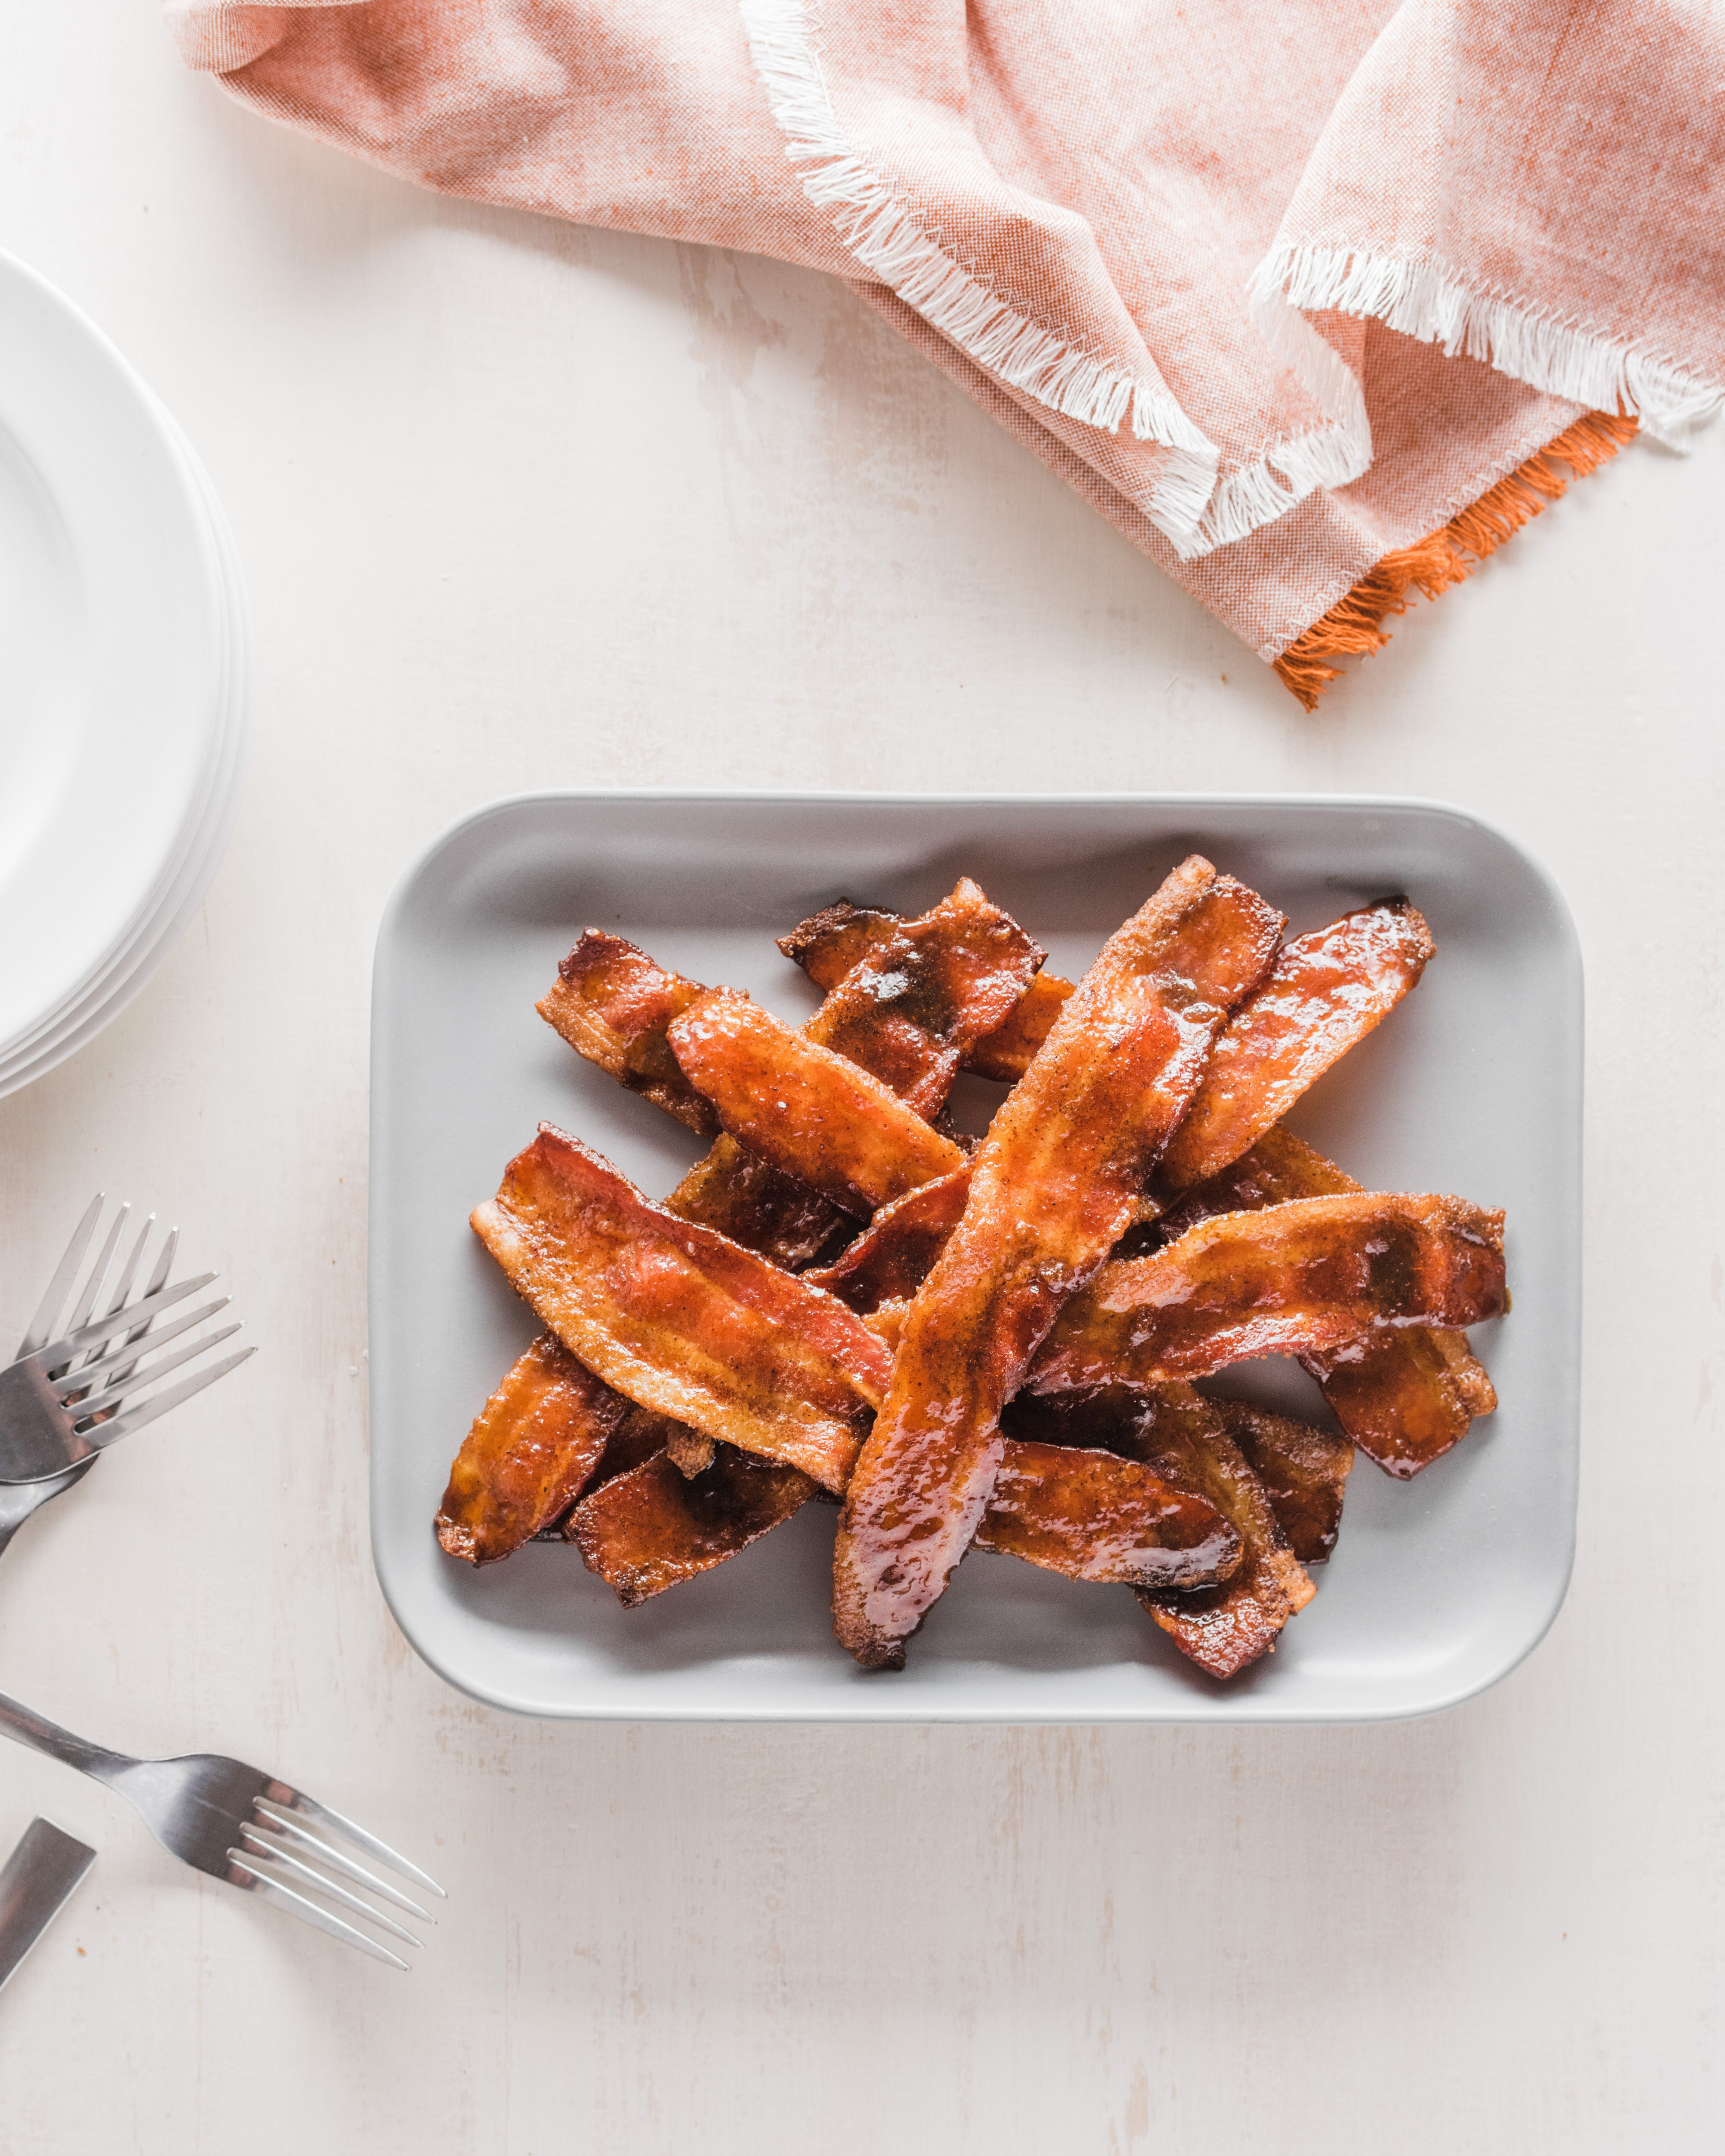 Tray with spiced bacon